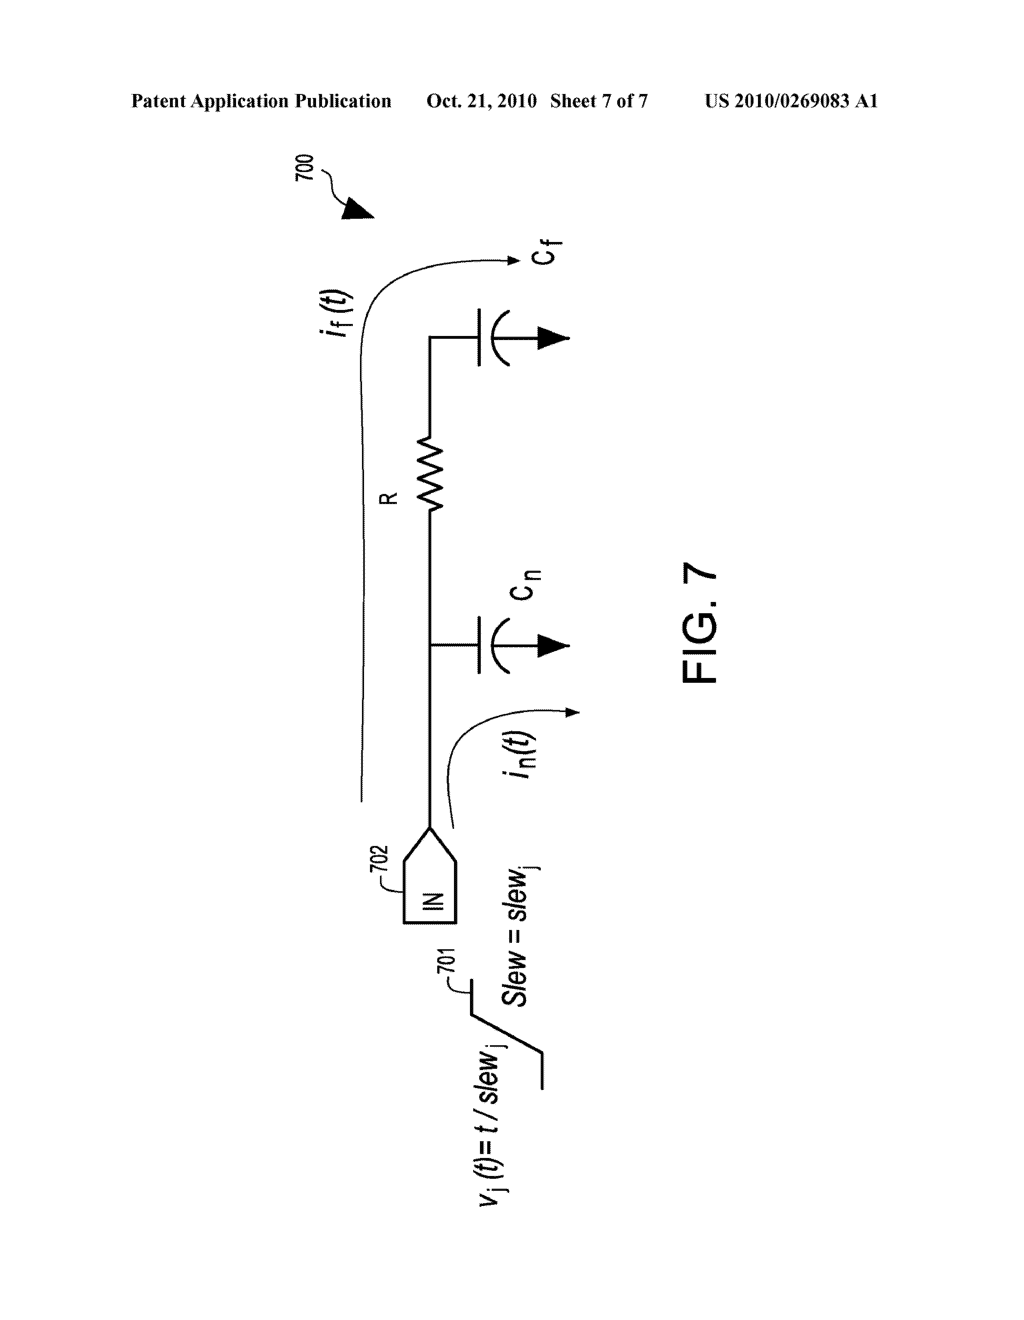 Method of Employing Slew Dependent Pin Capacitances to Capture Interconnect Parasitics During Timing Abstraction of VLSI Circuits - diagram, schematic, and image 08